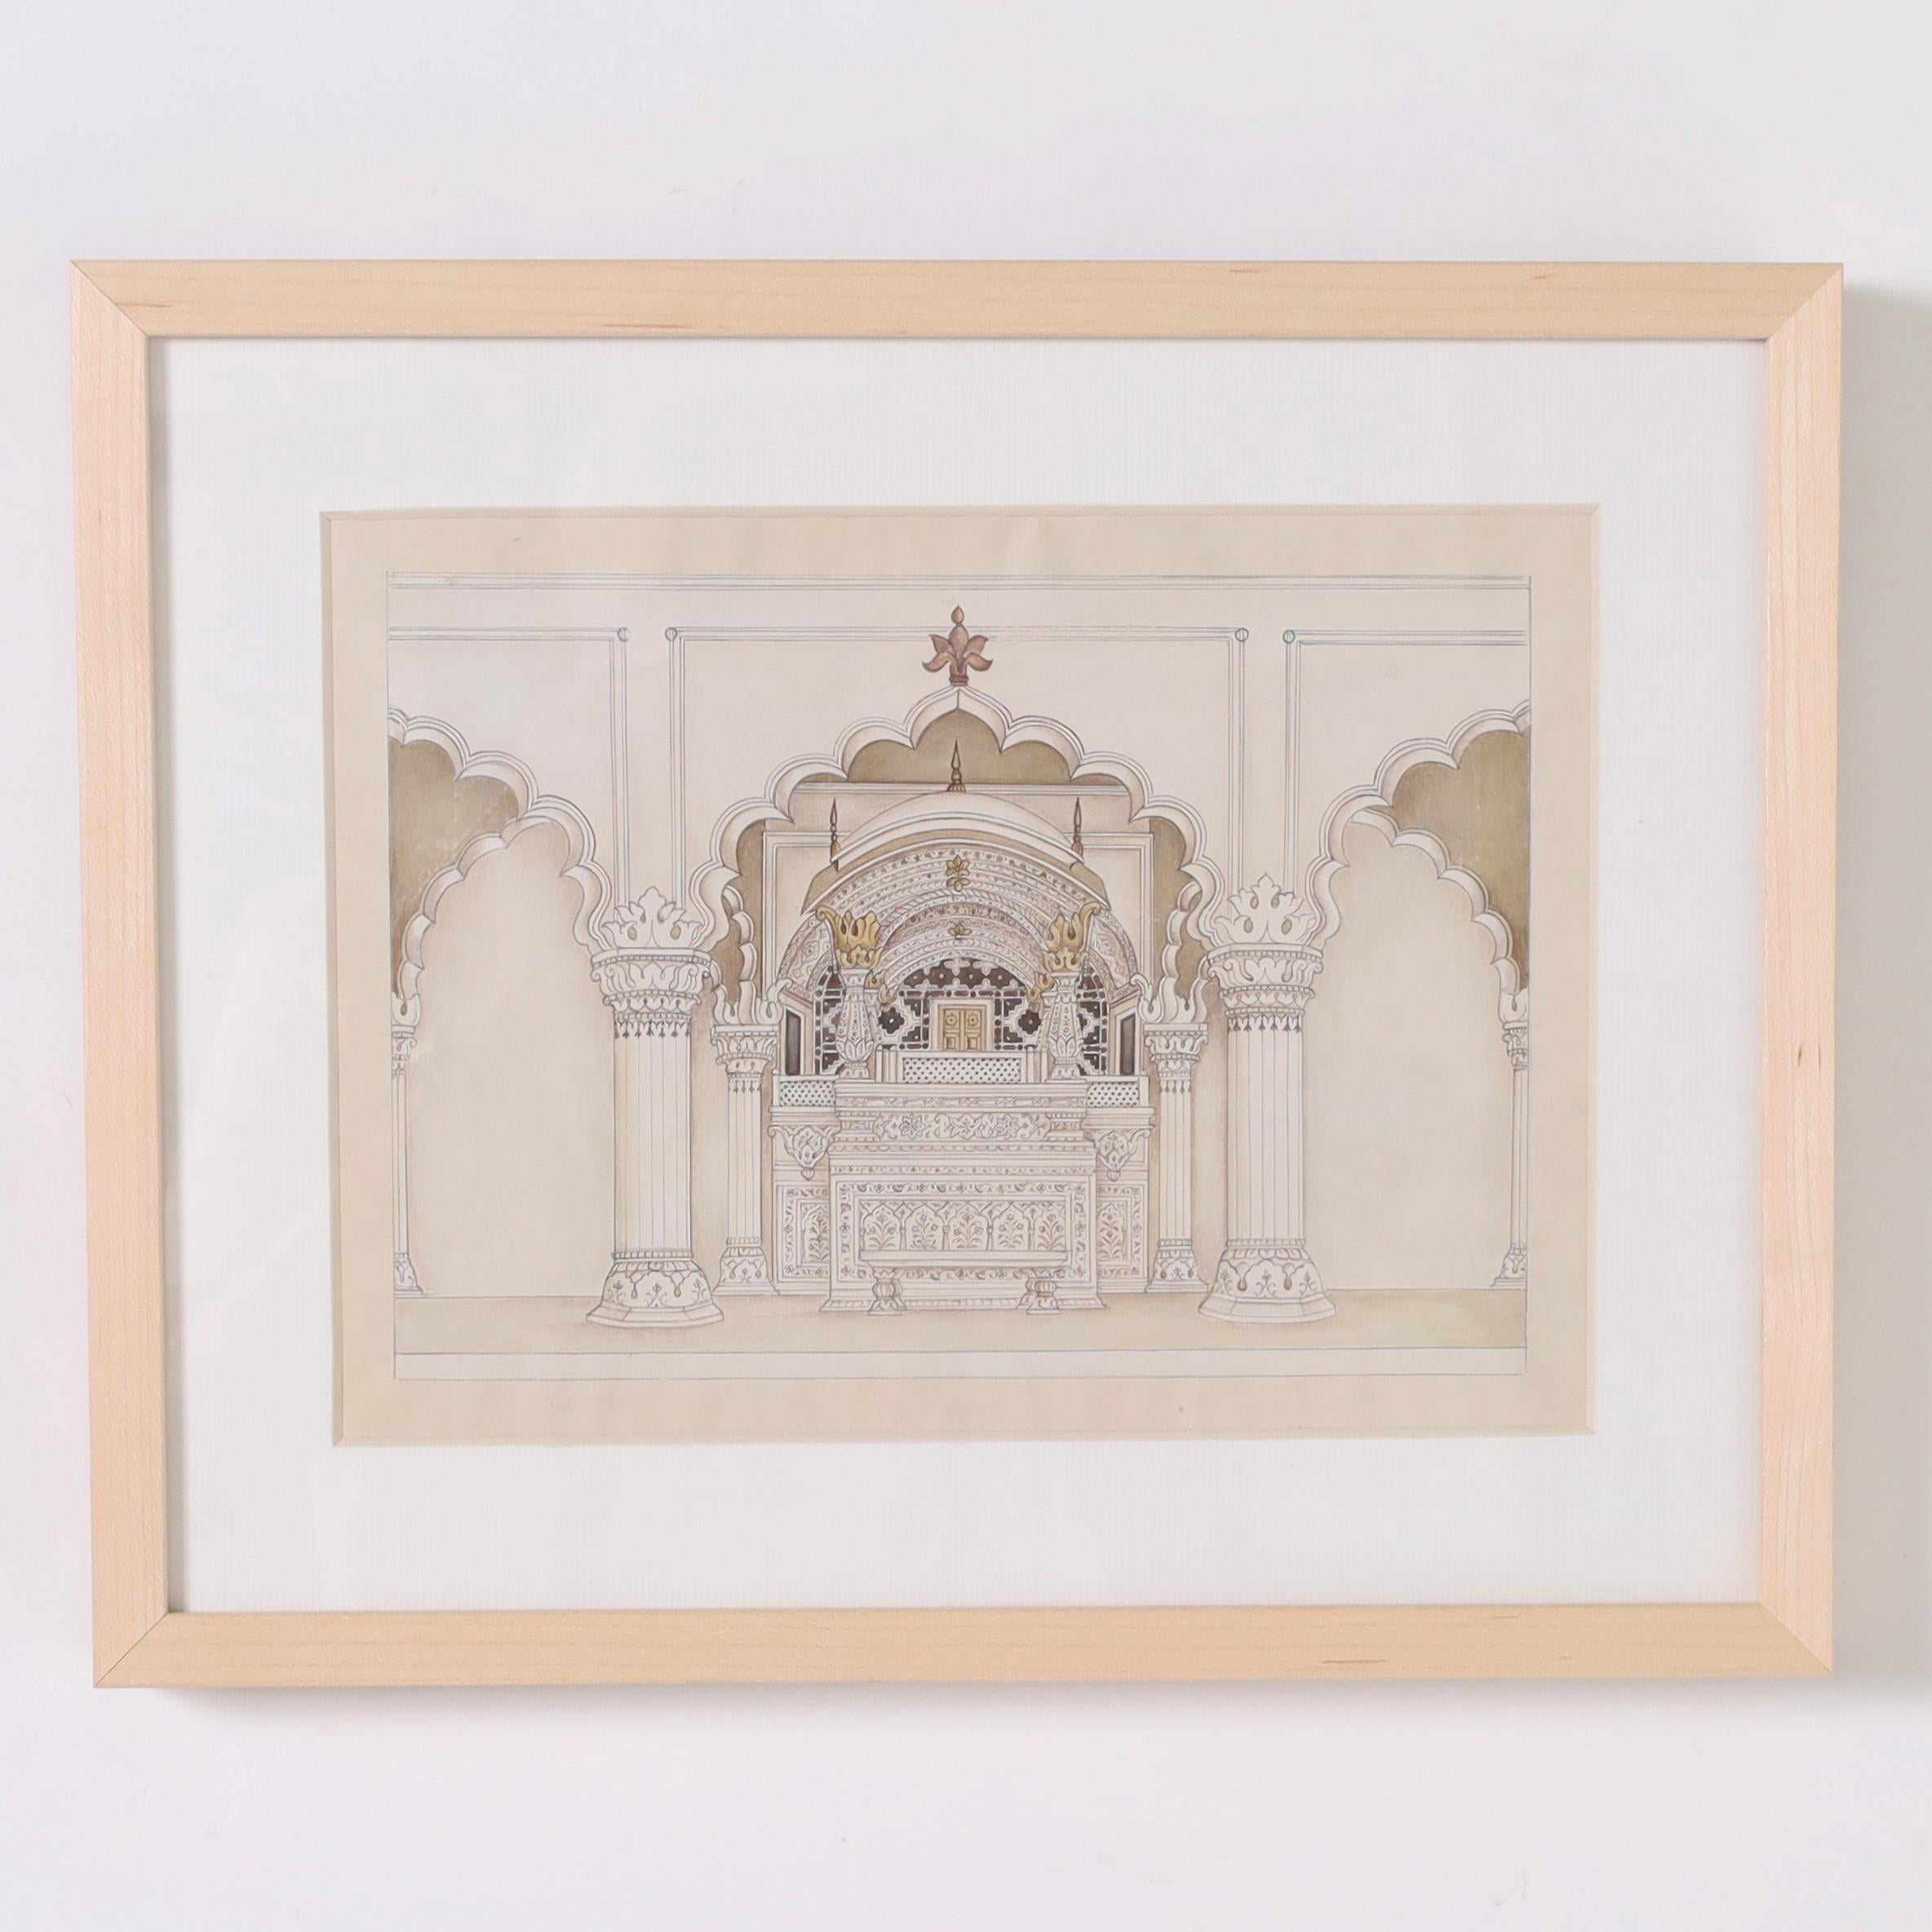 Transporting antique group of six watercolors depicting Indian architecture in soft muted colors. Presented in wood frames under glass.